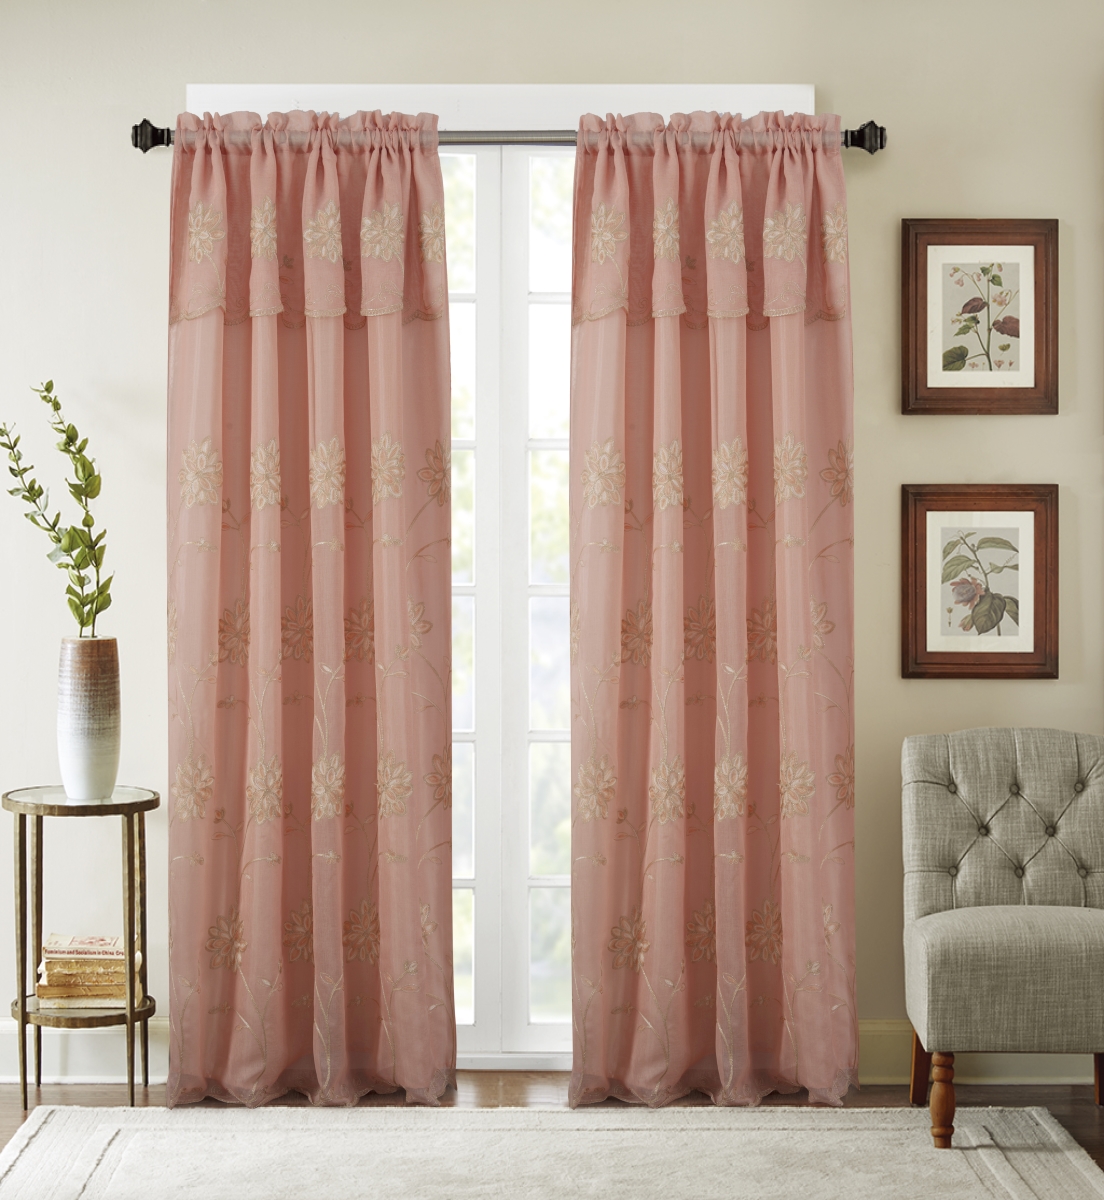 Pnc235136 54 X 84 In. Carter Floral Embroidered Single Rod Pocket Curtain Panel With Attached Valance, Salmon